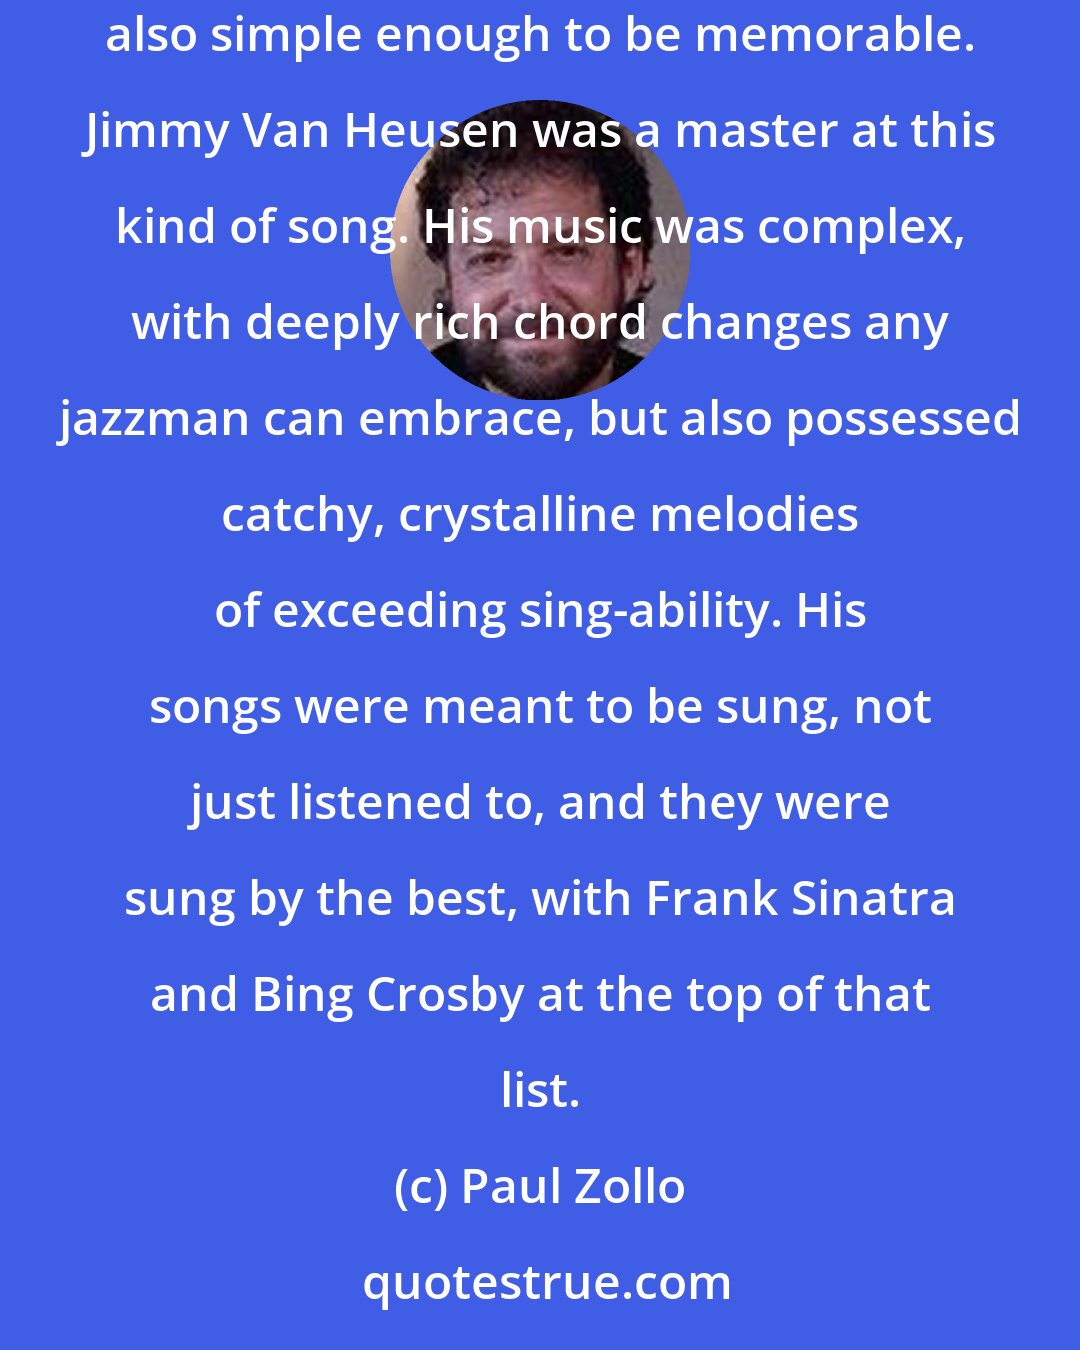 Paul Zollo: Paul Simon once said that a songwriter's supreme challenge was being complex and simple at the same time-writing songs with lasting depth that are also simple enough to be memorable. Jimmy Van Heusen was a master at this kind of song. His music was complex, with deeply rich chord changes any jazzman can embrace, but also possessed catchy, crystalline melodies of exceeding sing-ability. His songs were meant to be sung, not just listened to, and they were sung by the best, with Frank Sinatra and Bing Crosby at the top of that list.